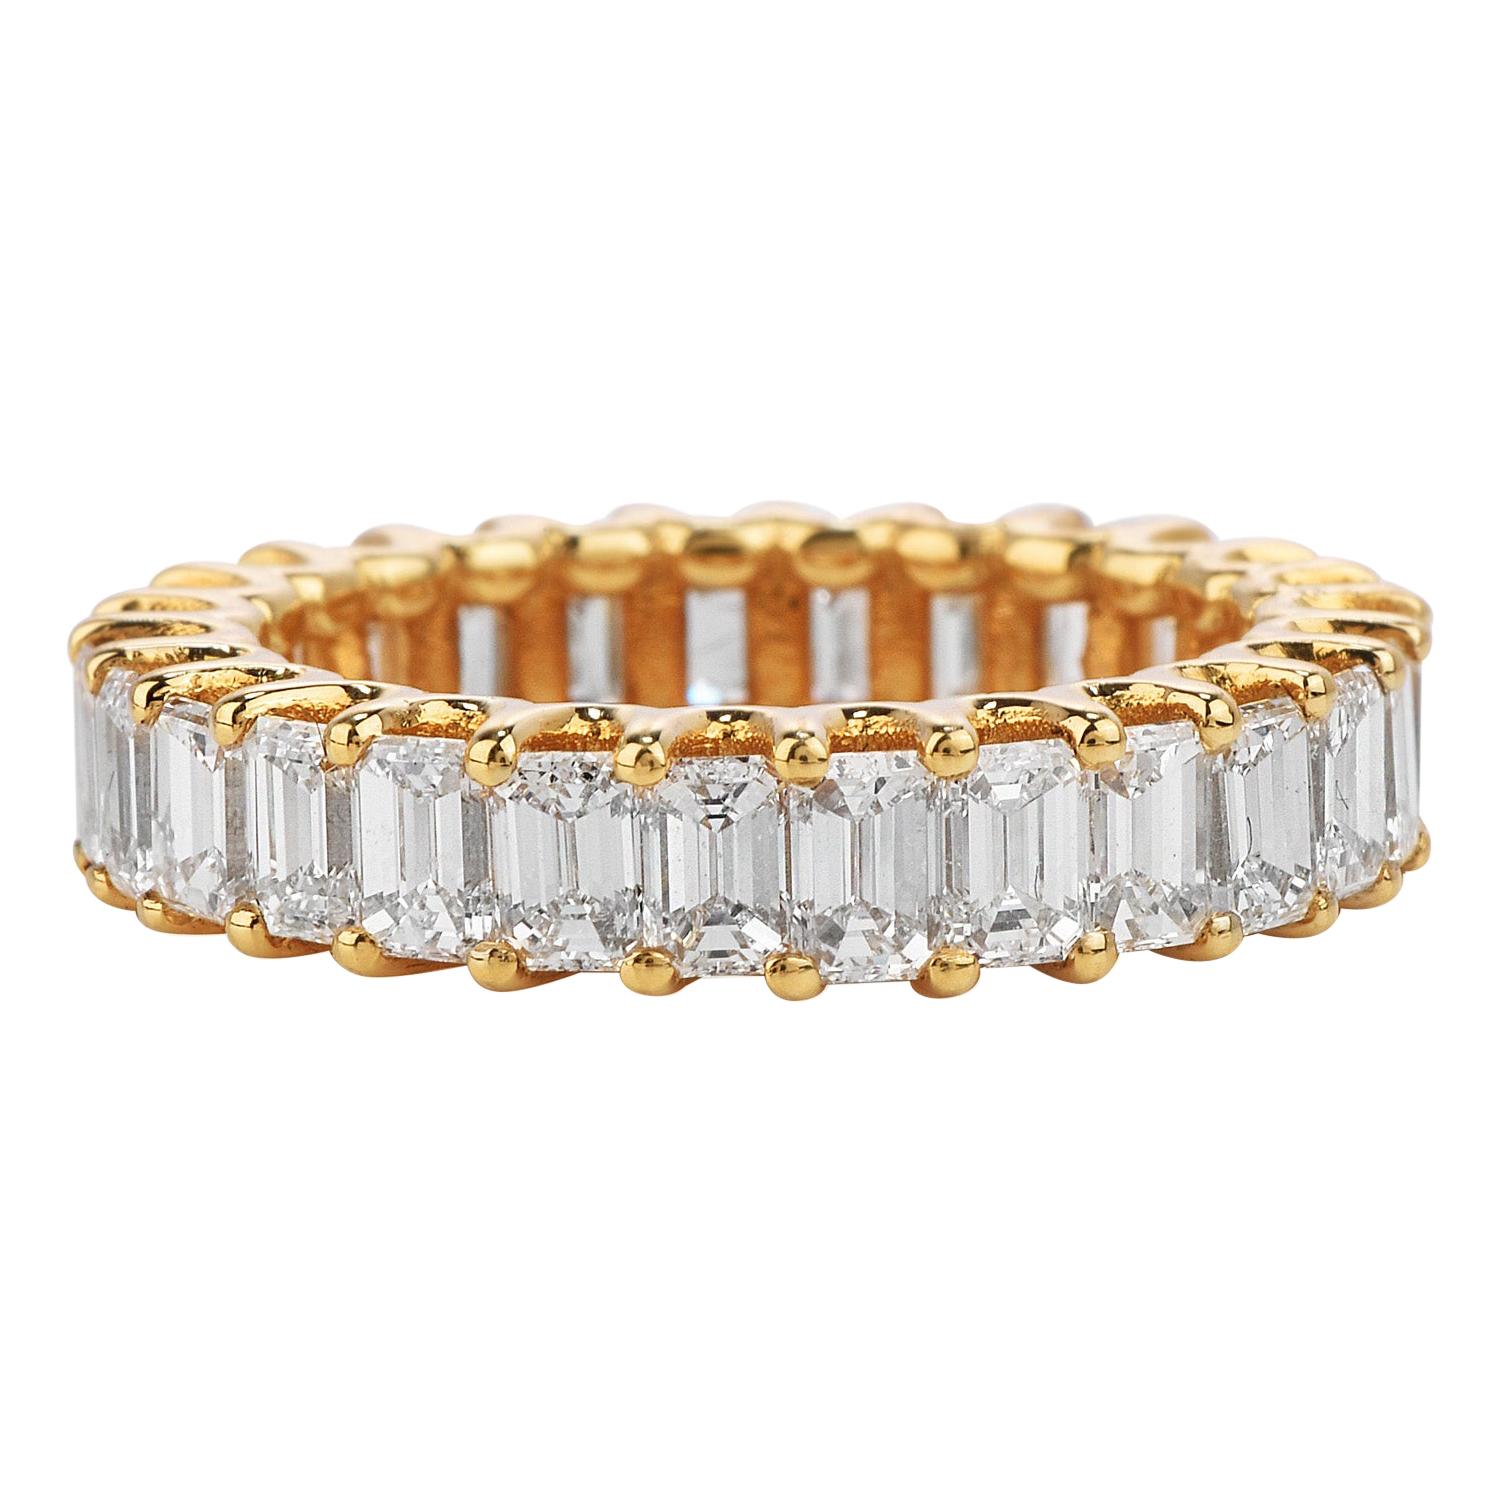 Elegance and endless love in a classic eternity wedding band ring. 

Hand Crafted in solid 14K yellow gold, it is adorned by (27) Baguette-cut, Pave-set, High-Quality genuine Diamonds weighing in total 3.82 carats, (F-G  color and VS1